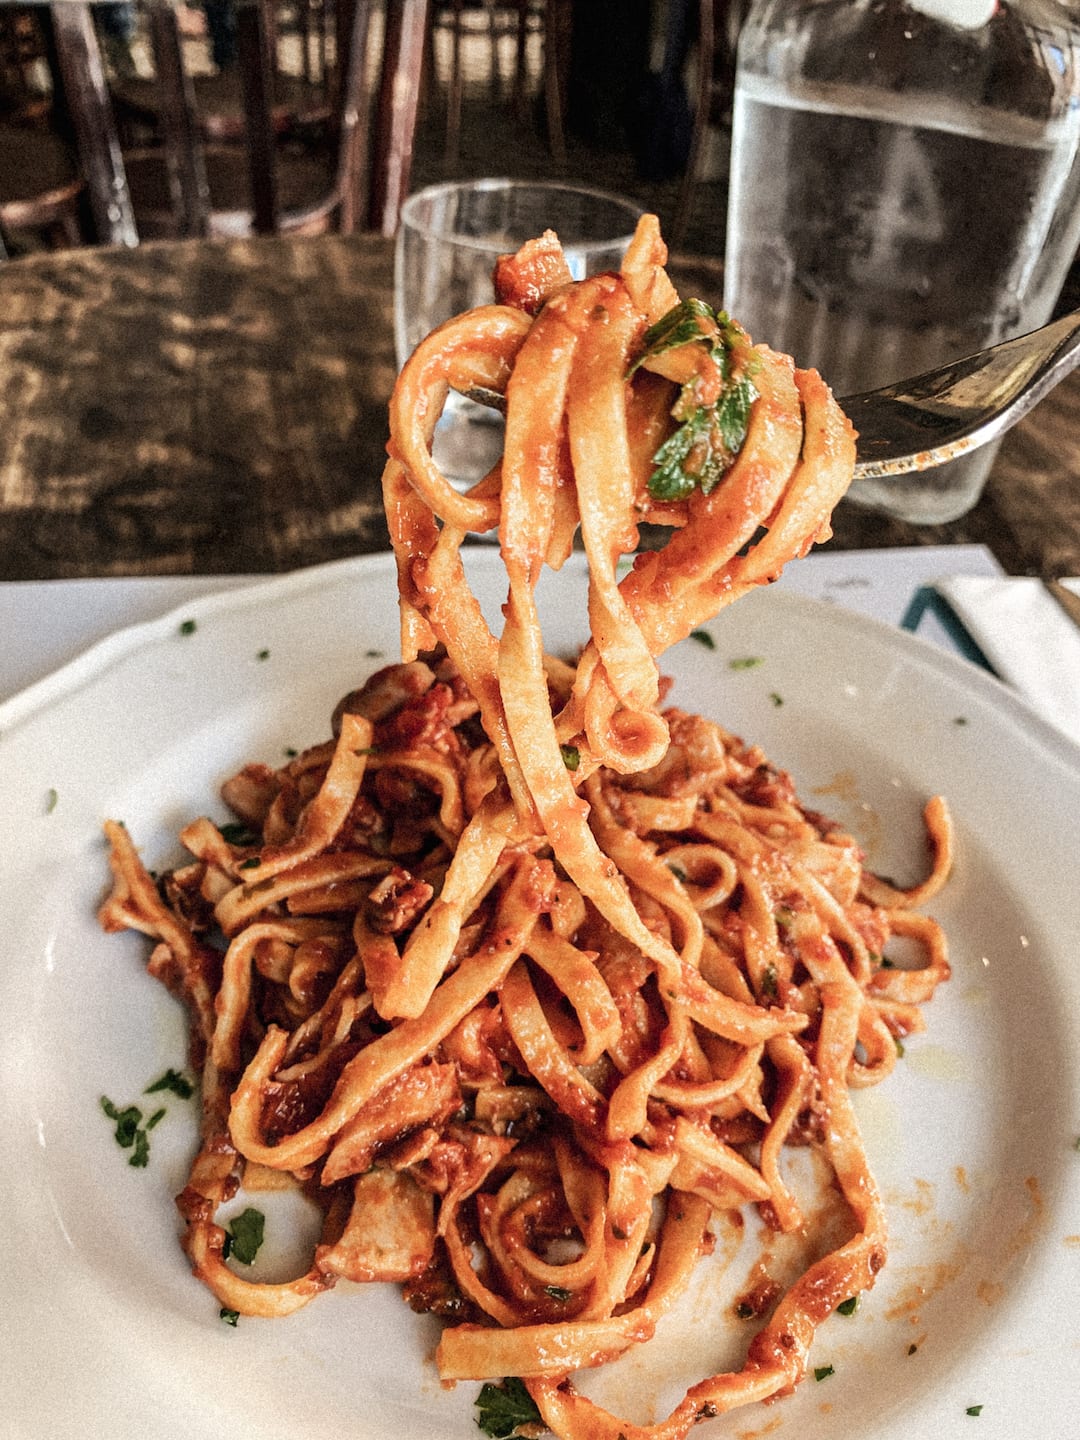 the yummy and simple tagliolini pasta with seafood and tomato sauce by civico 4 in cavour